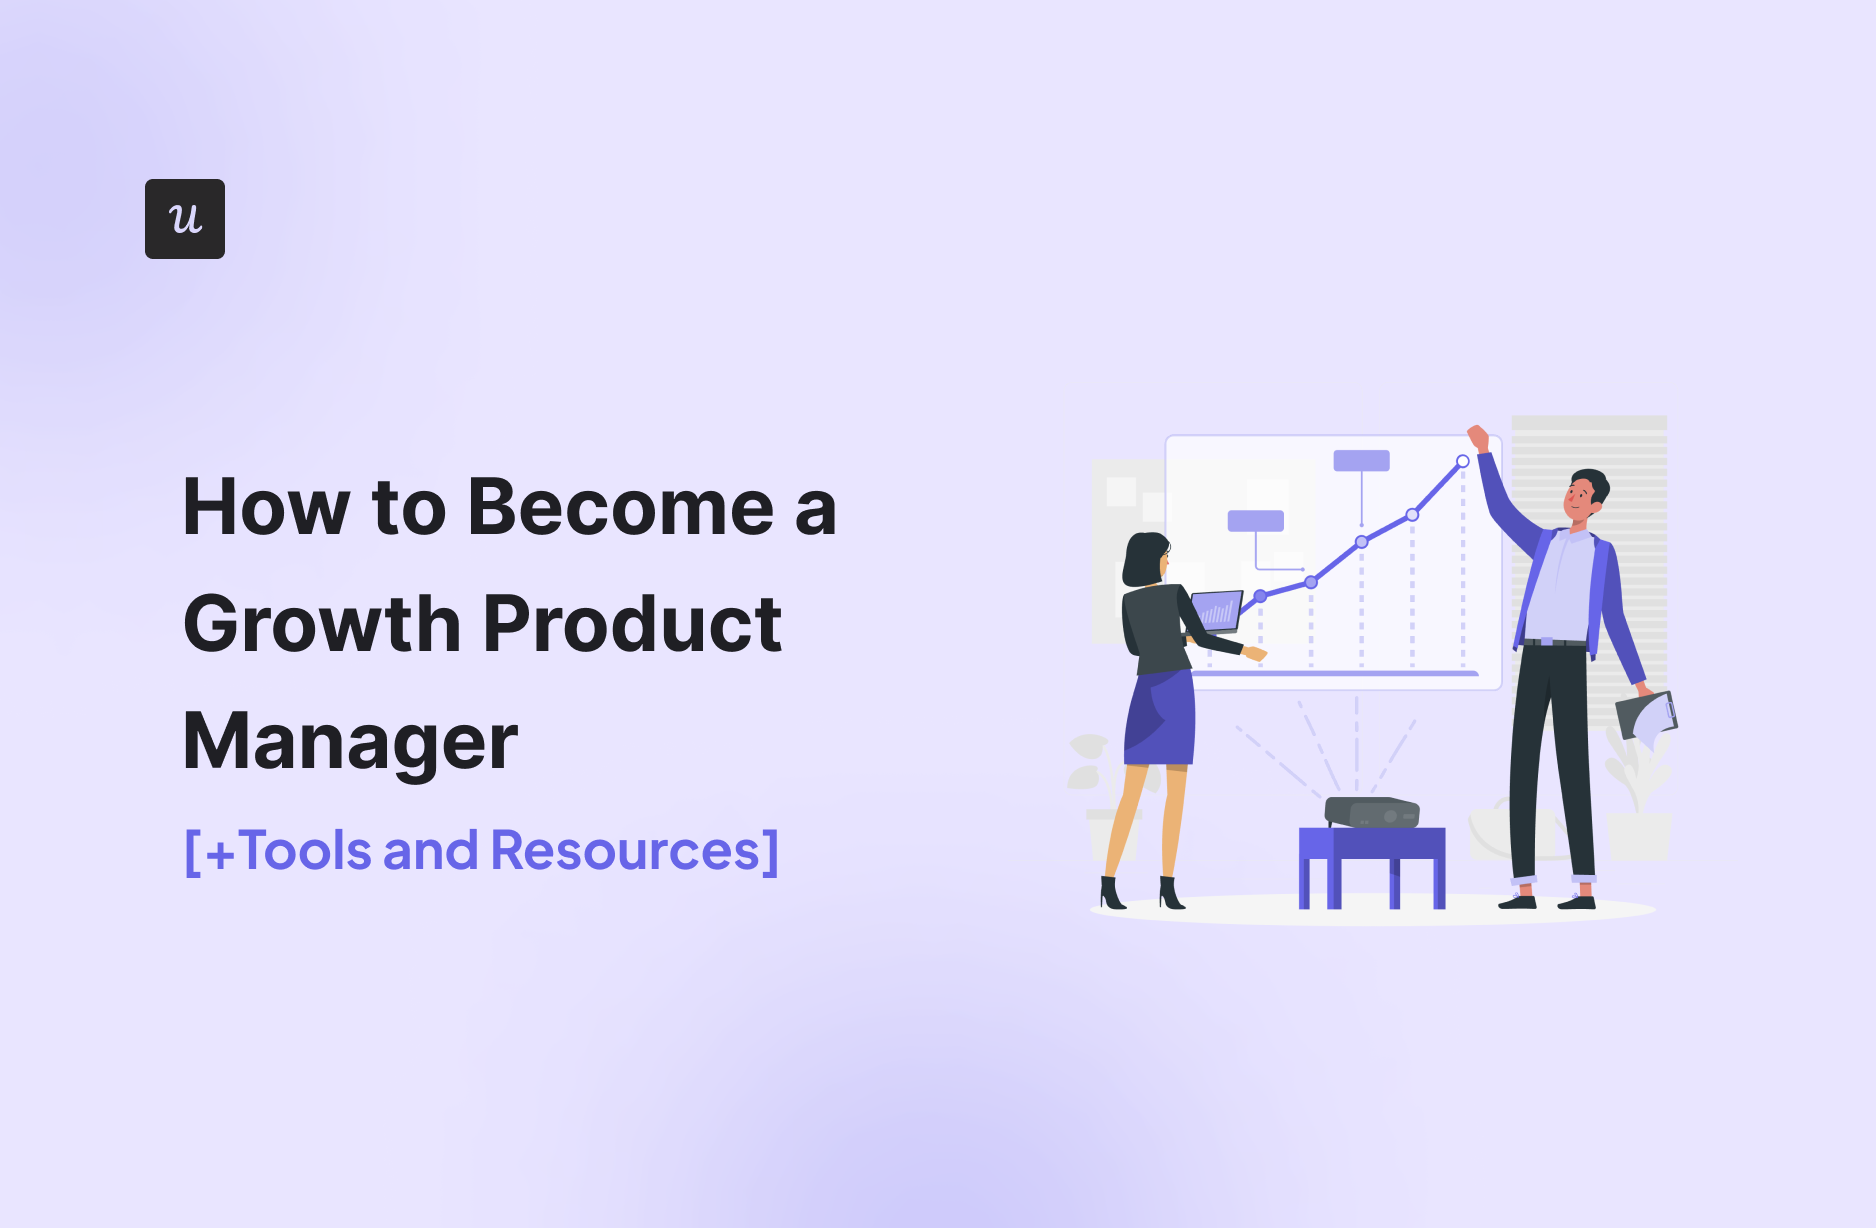 How to Become a Growth Product Manager [+Tools and Resources]